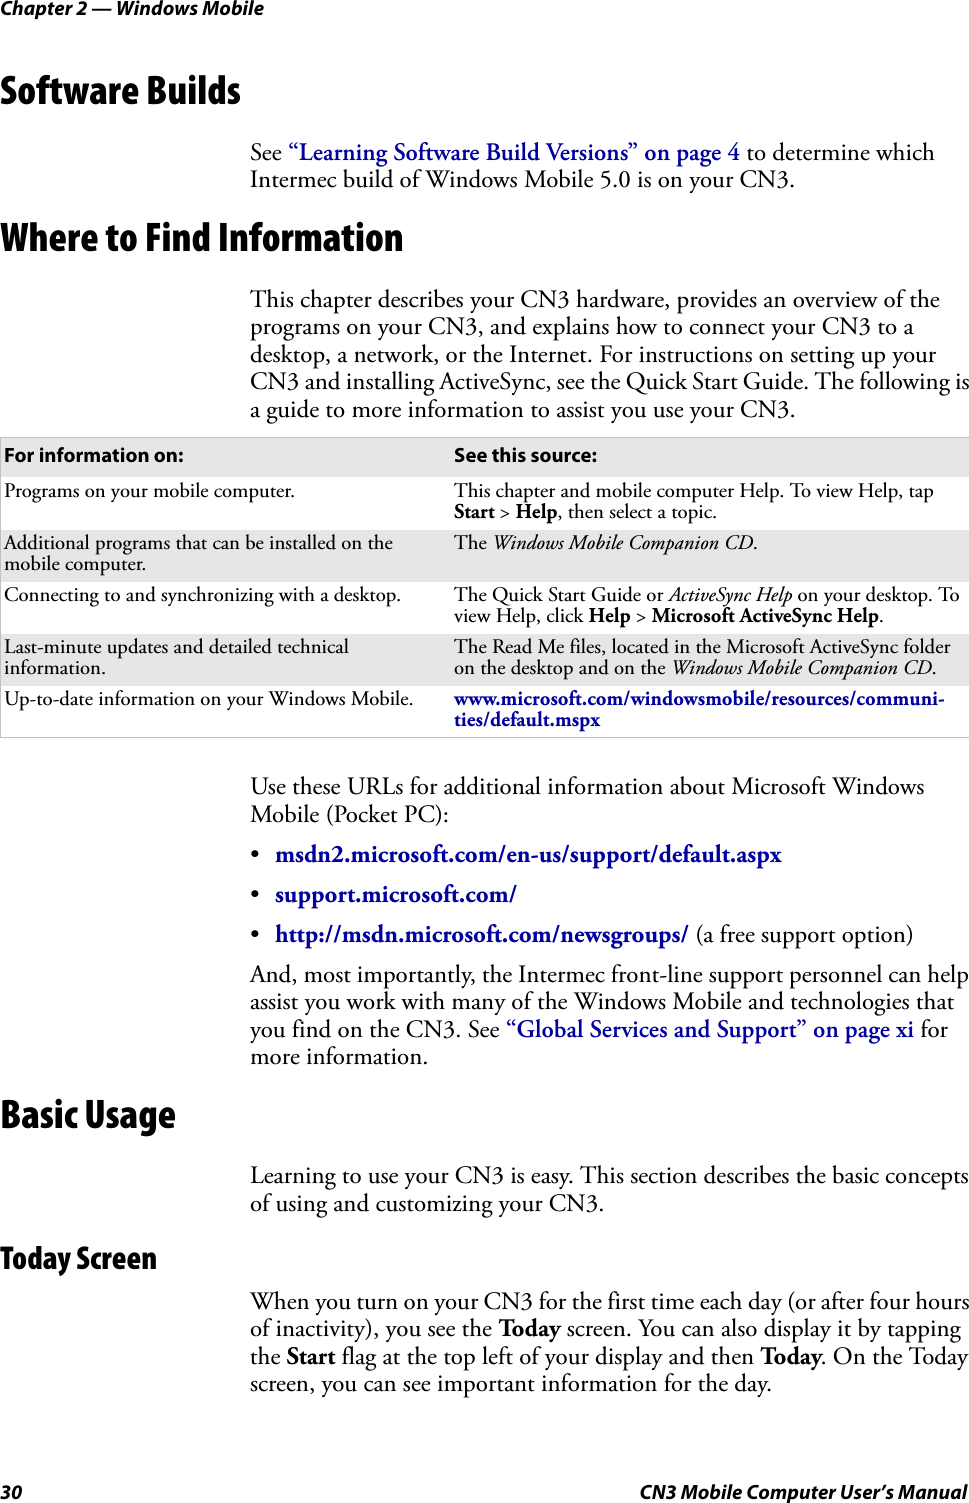 Chapter 2 — Windows Mobile30 CN3 Mobile Computer User’s ManualSoftware BuildsSee “Learning Software Build Versions” on page 4 to determine which Intermec build of Windows Mobile 5.0 is on your CN3.Where to Find InformationThis chapter describes your CN3 hardware, provides an overview of the programs on your CN3, and explains how to connect your CN3 to a desktop, a network, or the Internet. For instructions on setting up your CN3 and installing ActiveSync, see the Quick Start Guide. The following is a guide to more information to assist you use your CN3.Use these URLs for additional information about Microsoft Windows Mobile (Pocket PC):•msdn2.microsoft.com/en-us/support/default.aspx•support.microsoft.com/•http://msdn.microsoft.com/newsgroups/ (a free support option)And, most importantly, the Intermec front-line support personnel can help assist you work with many of the Windows Mobile and technologies that you find on the CN3. See “Global Services and Support” on page xi for more information.Basic UsageLearning to use your CN3 is easy. This section describes the basic concepts of using and customizing your CN3.Today ScreenWhen you turn on your CN3 for the first time each day (or after four hours of inactivity), you see the To d a y  screen. You can also display it by tapping the Start flag at the top left of your display and then To d a y. On the Today screen, you can see important information for the day.For information on: See this source:Programs on your mobile computer. This chapter and mobile computer Help. To view Help, tap Start &gt; Help, then select a topic.Additional programs that can be installed on the mobile computer.The Windows Mobile Companion CD.Connecting to and synchronizing with a desktop. The Quick Start Guide or ActiveSync Help on your desktop. To view Help, click Help &gt; Microsoft ActiveSync Help.Last-minute updates and detailed technical information.The Read Me files, located in the Microsoft ActiveSync folder on the desktop and on the Windows Mobile Companion CD.Up-to-date information on your Windows Mobile. www.microsoft.com/windowsmobile/resources/communi-ties/default.mspx